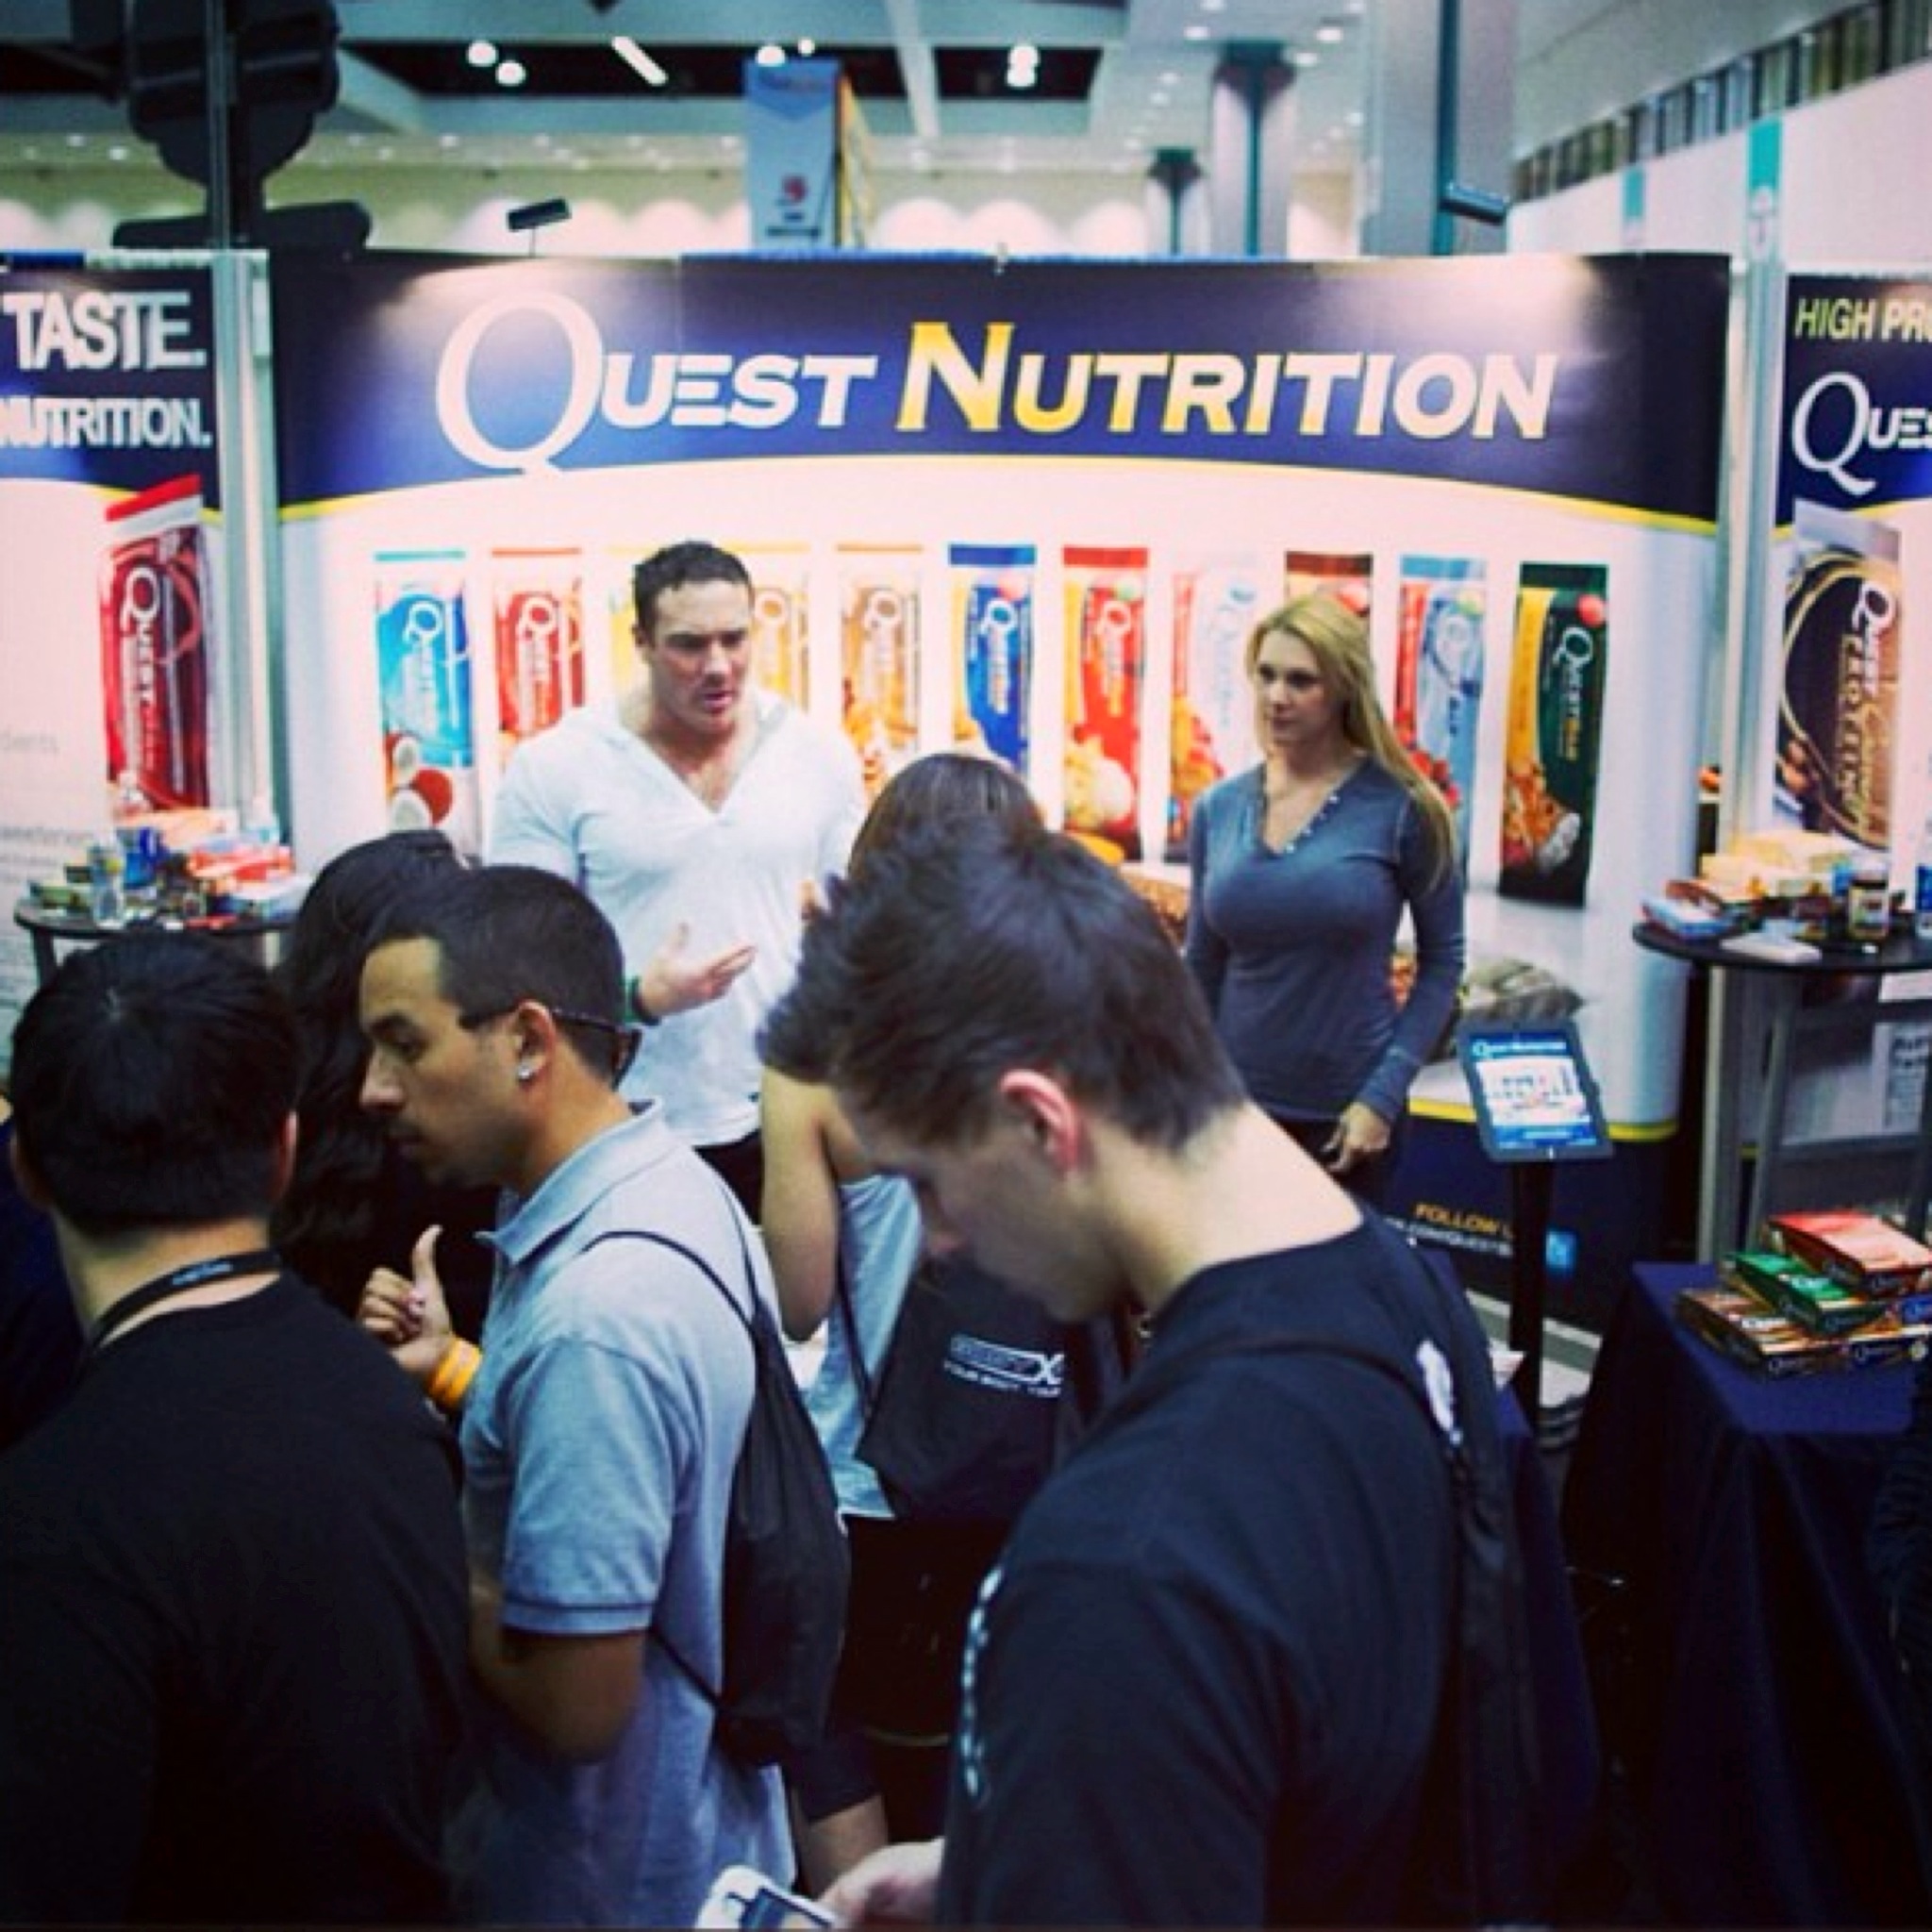 Quest Nutrition Booth